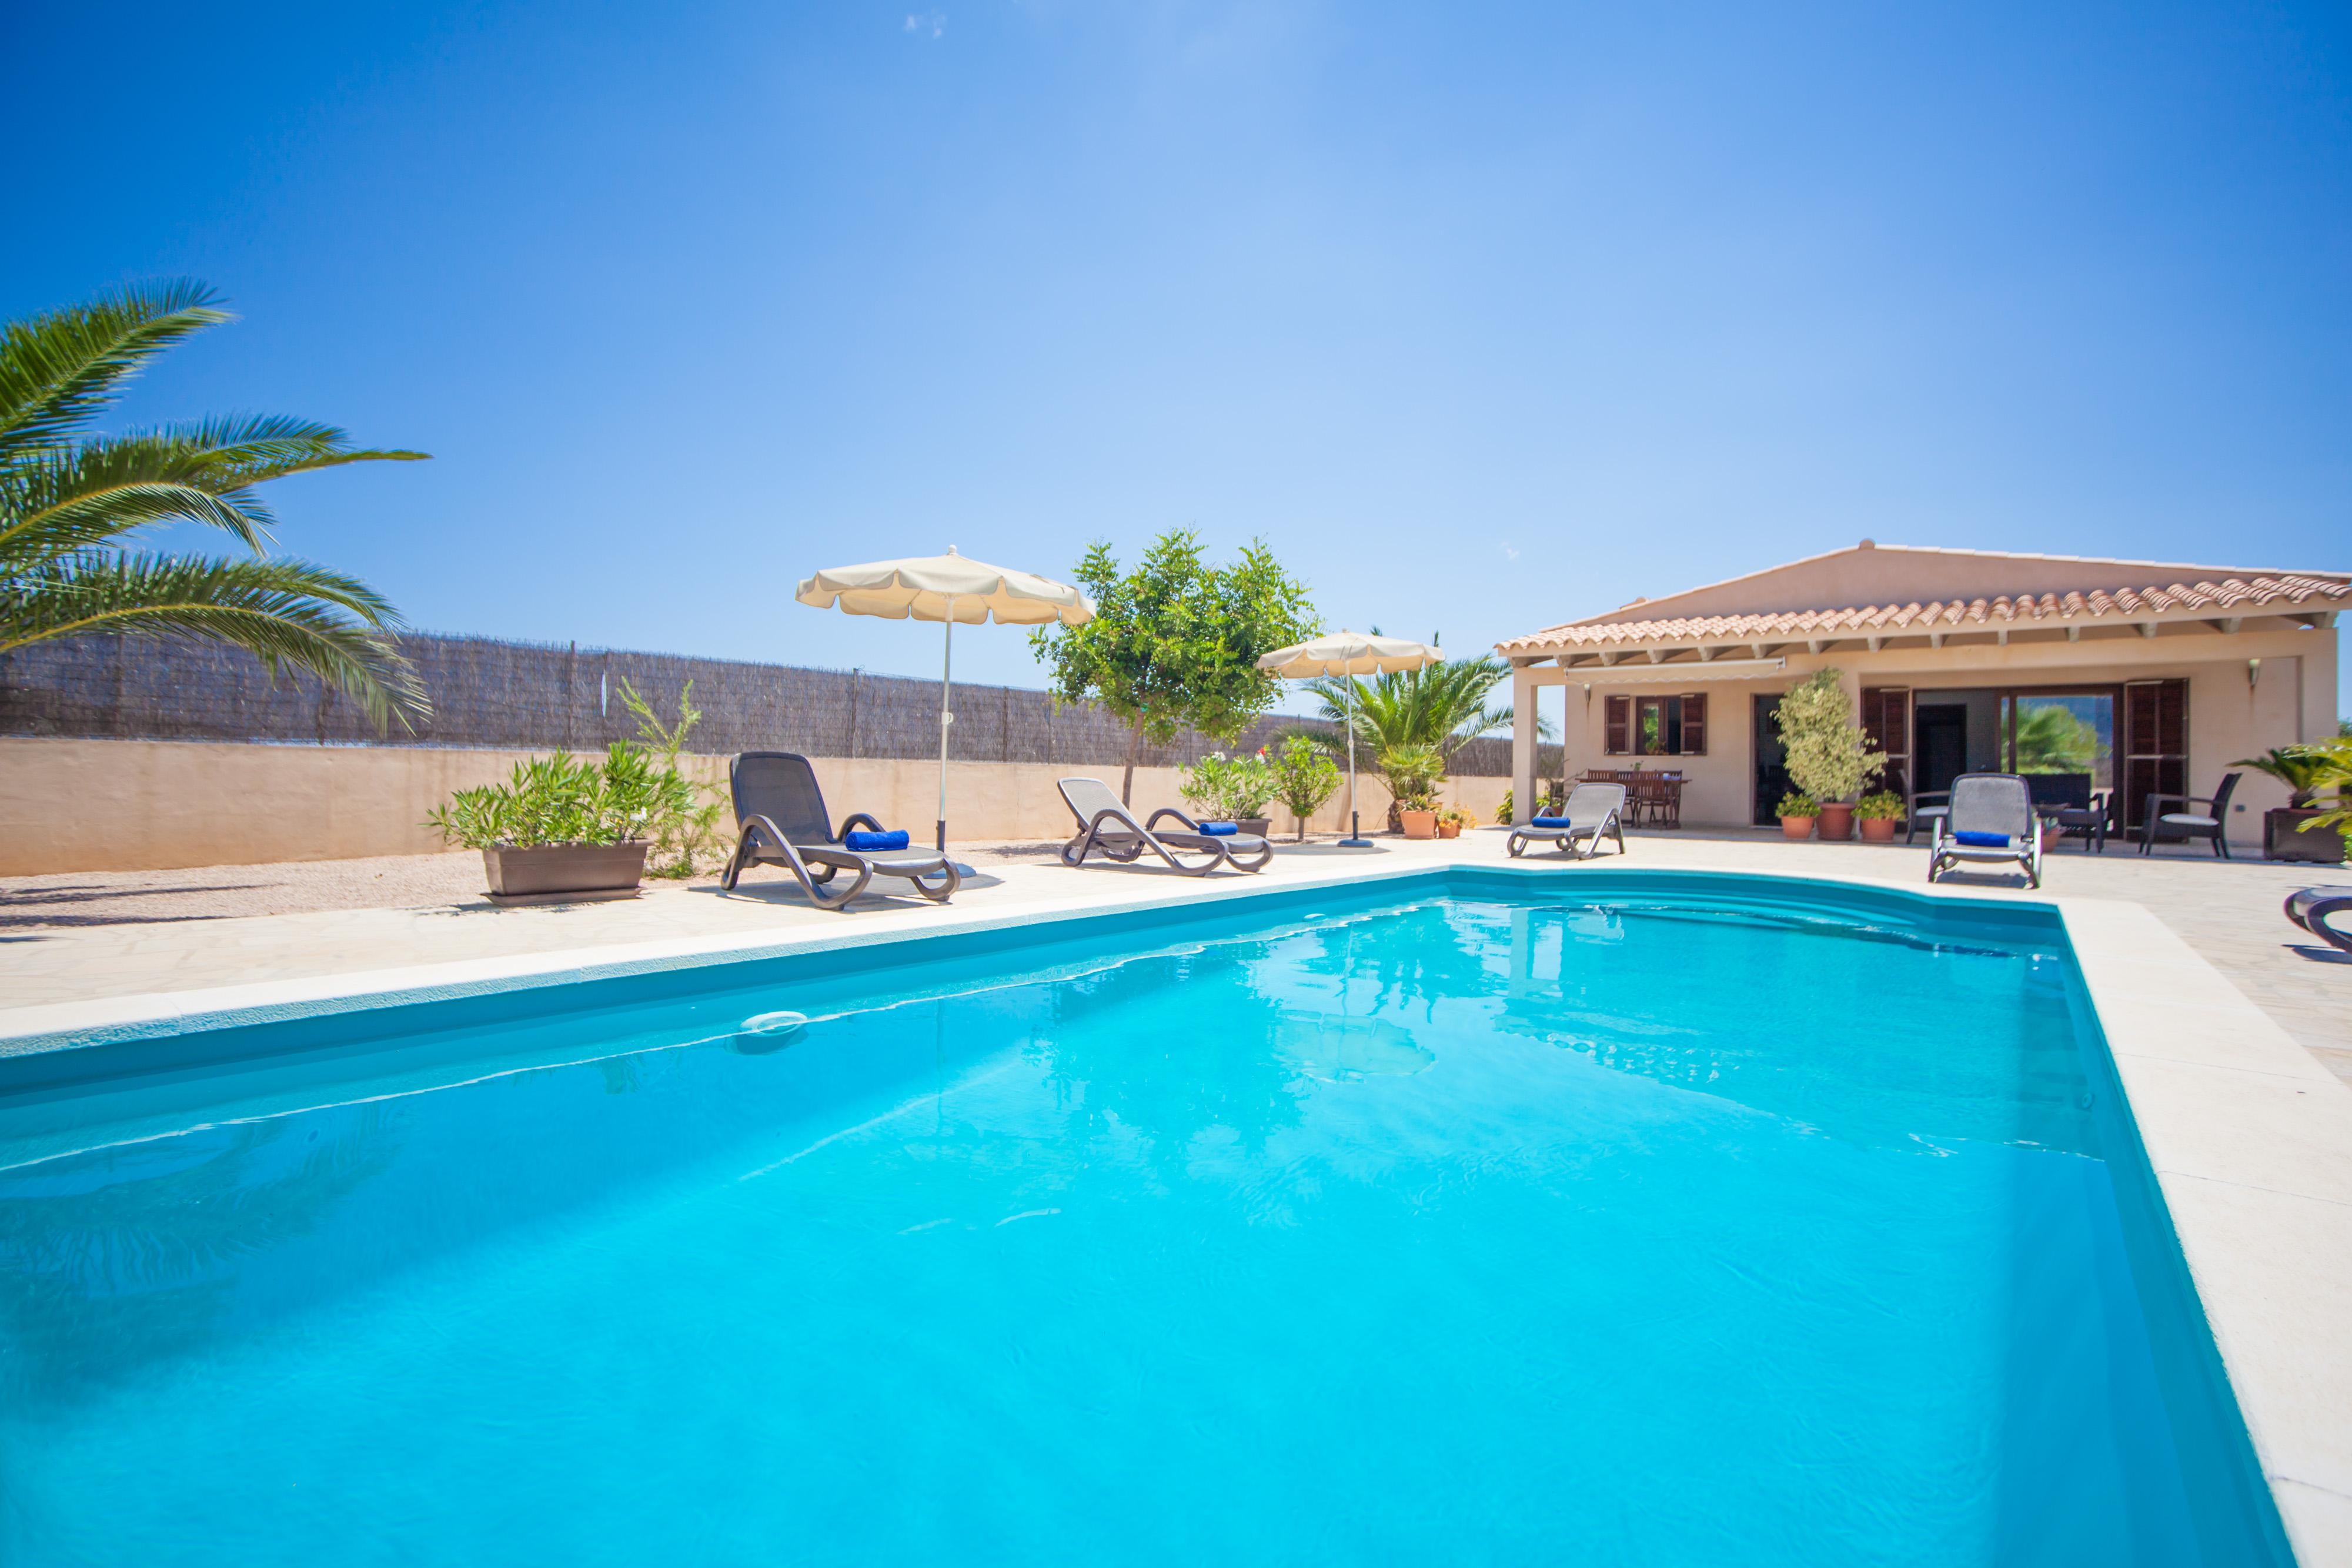 Property Image 2 - CAN MELIS - Wonderful villa with private pool located in rural and quiet surroundings. Free WiFi